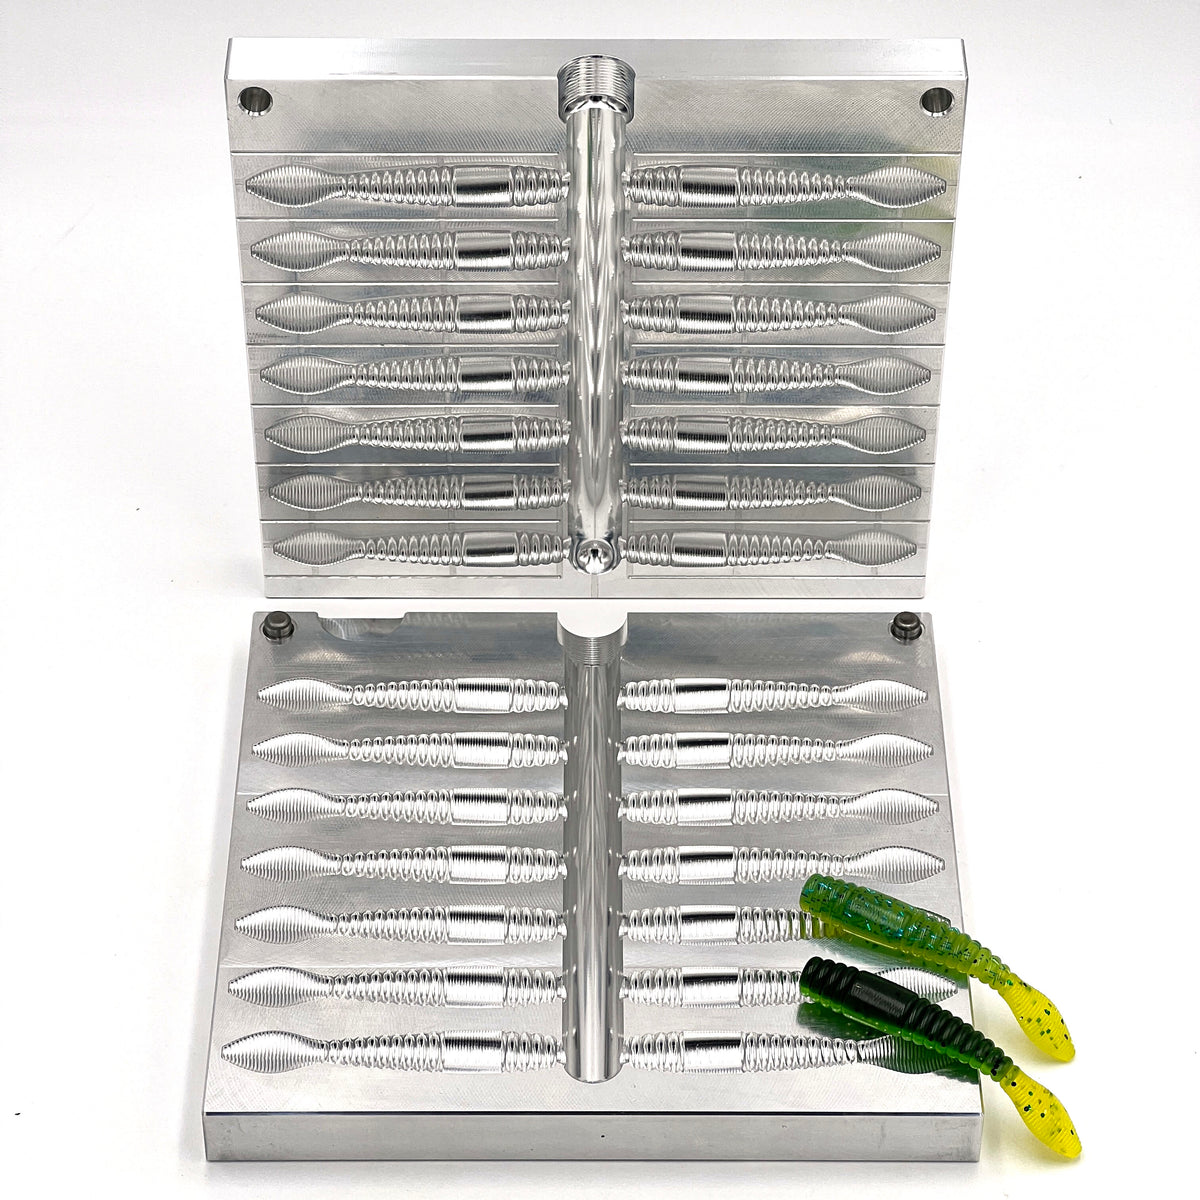 3 Inch Ned Stinger Hand Injection Mold – Epic Bait Molds